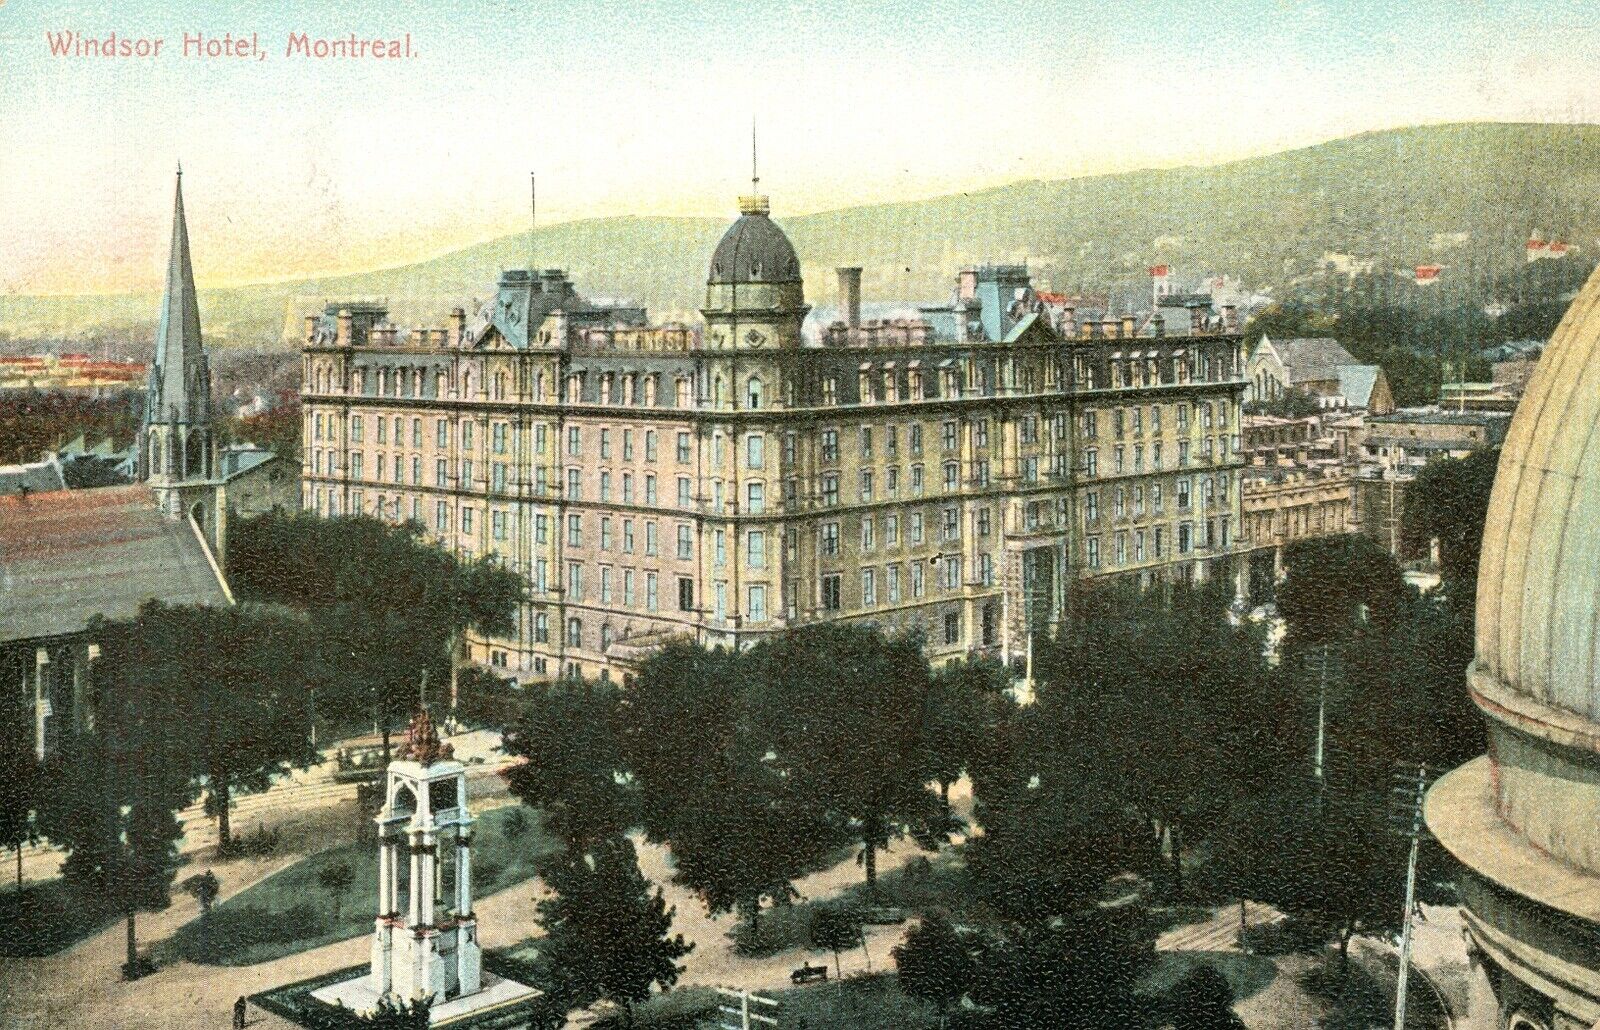 PRIVATE POST CARD Antique c1907 WINDSOR HOTEL, Montreal CANADA Reverse writing